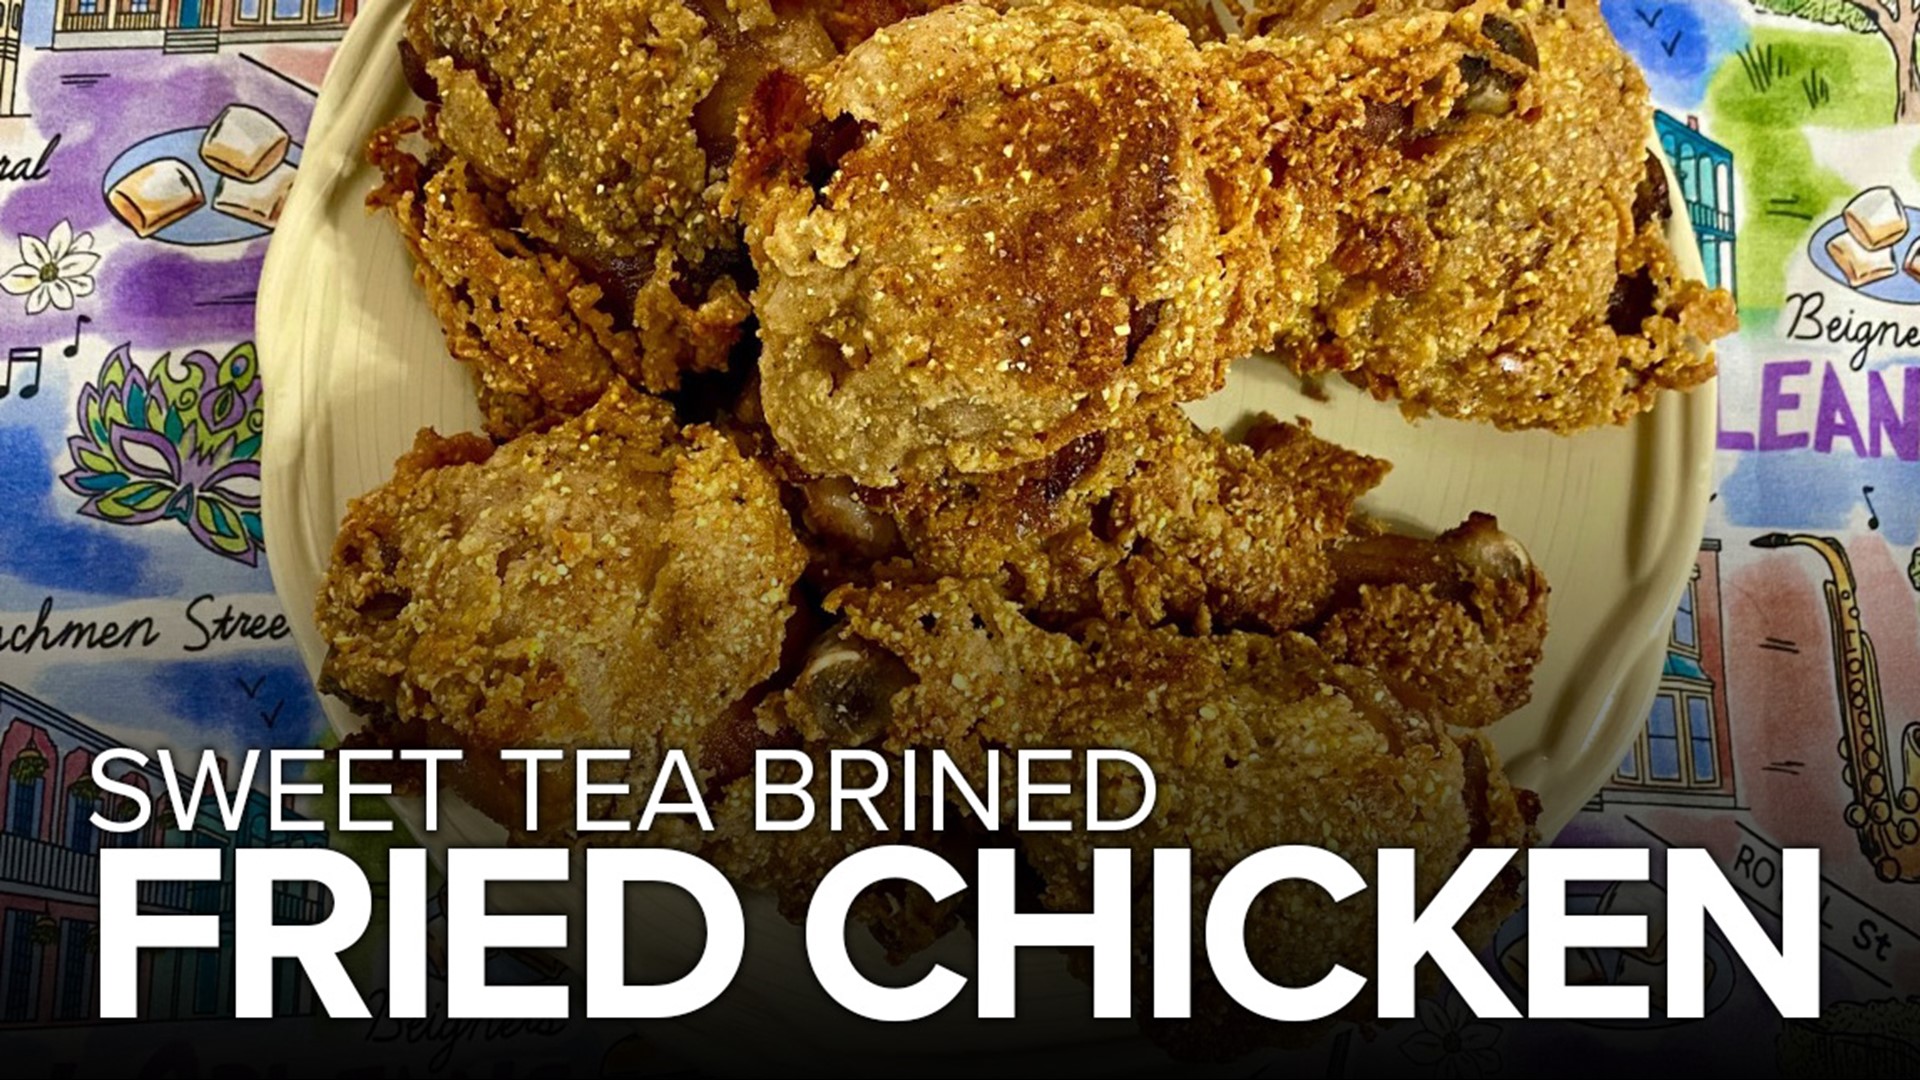 It's almost summer time, so today I'm combining two of my favorite summer treats to make sweet tea brined fried chicken!